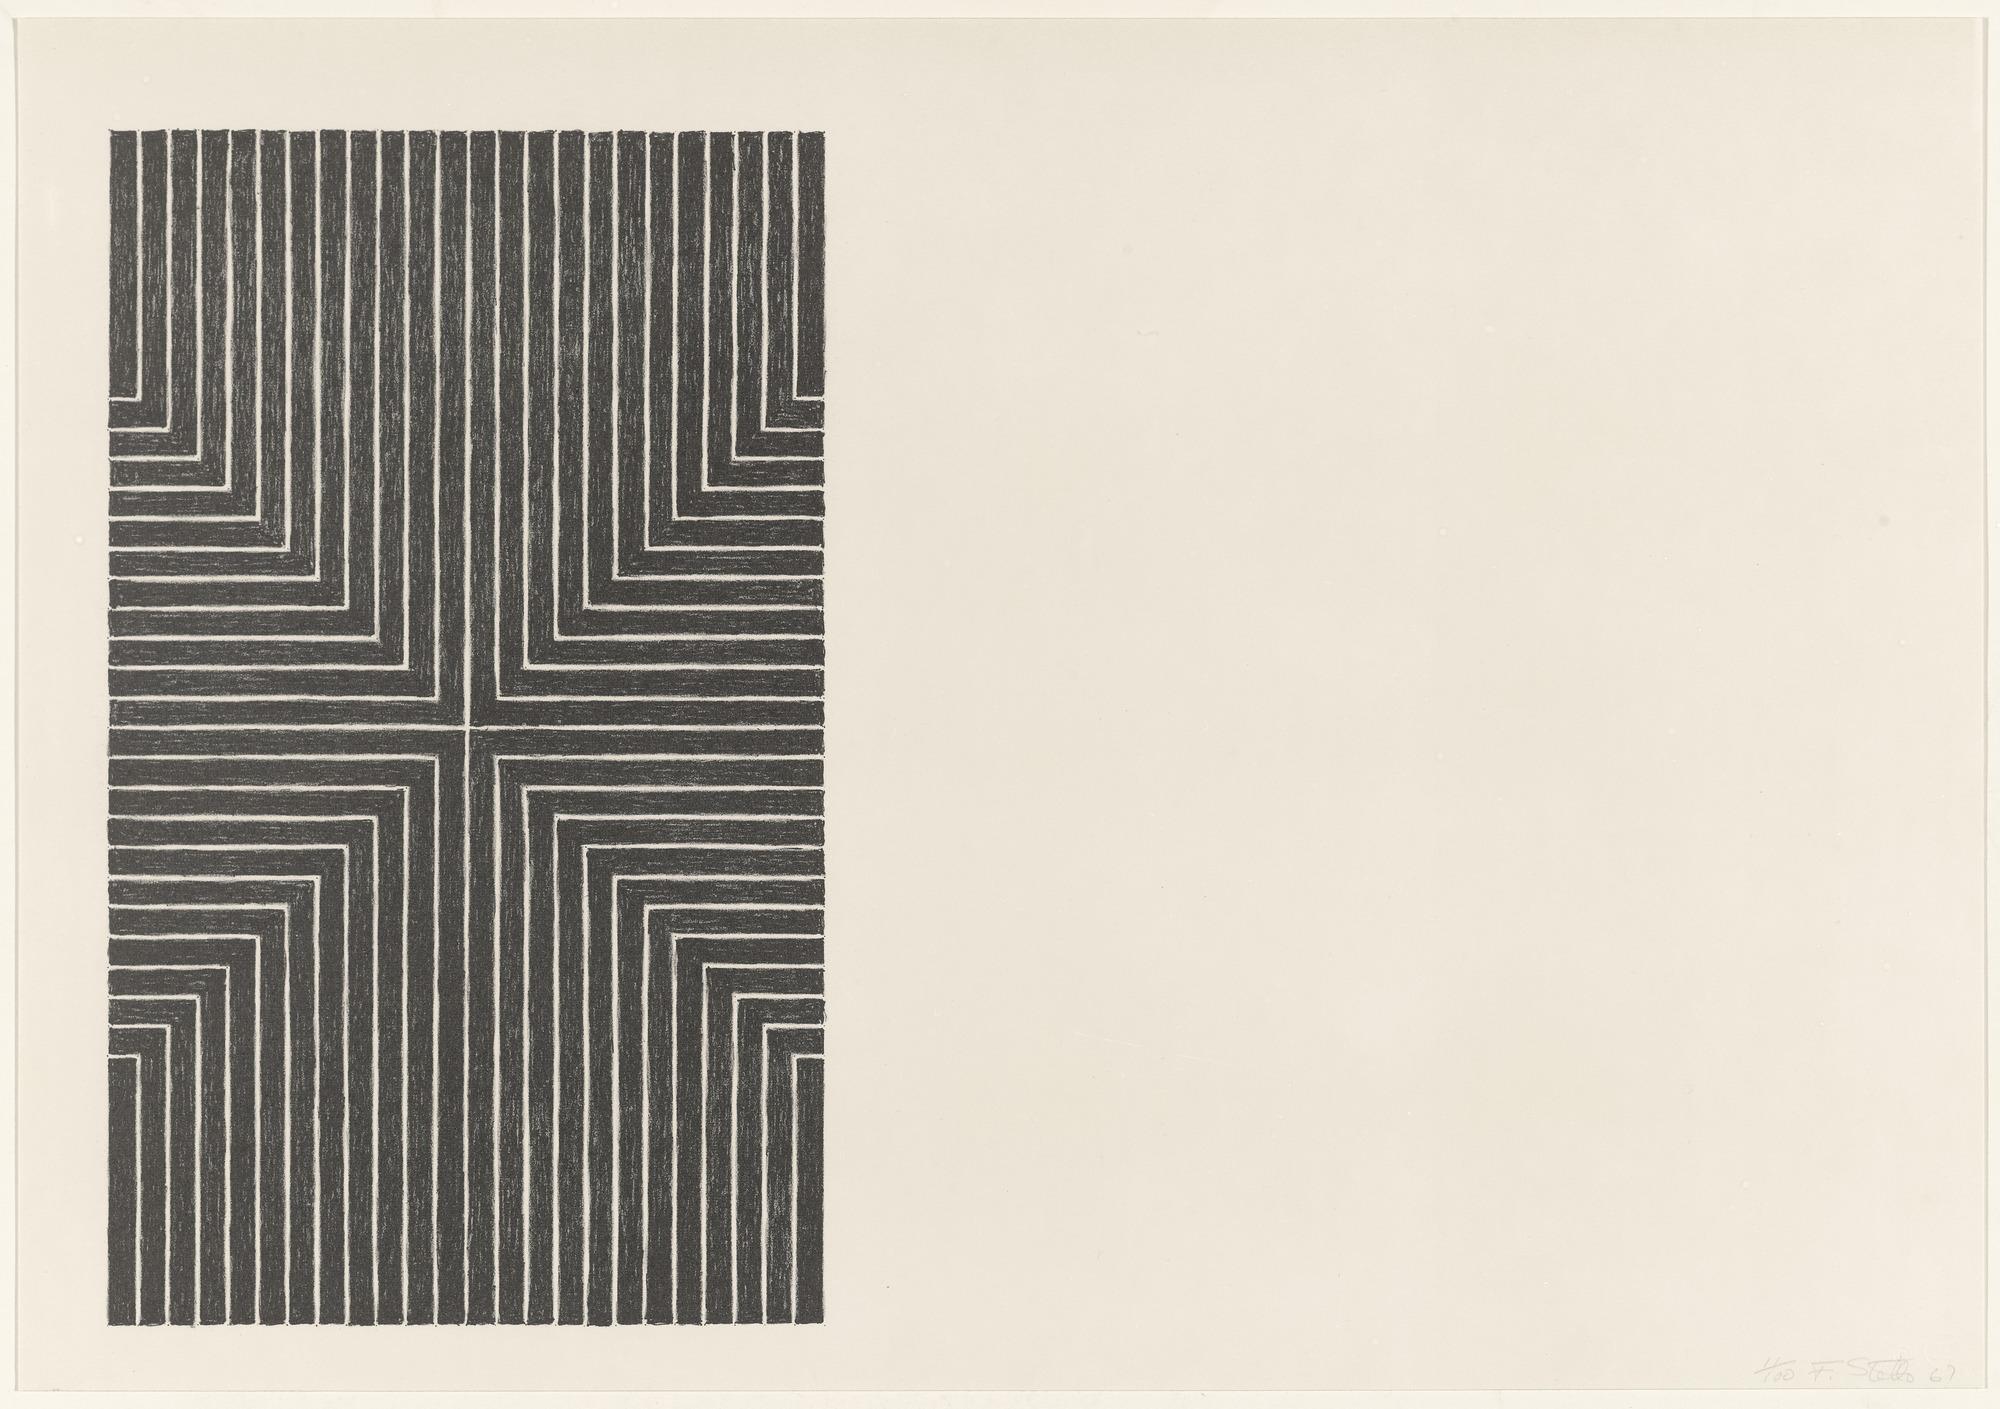 Frank Stella, Black Series I, Suite of 4 lithographs, 1967 1